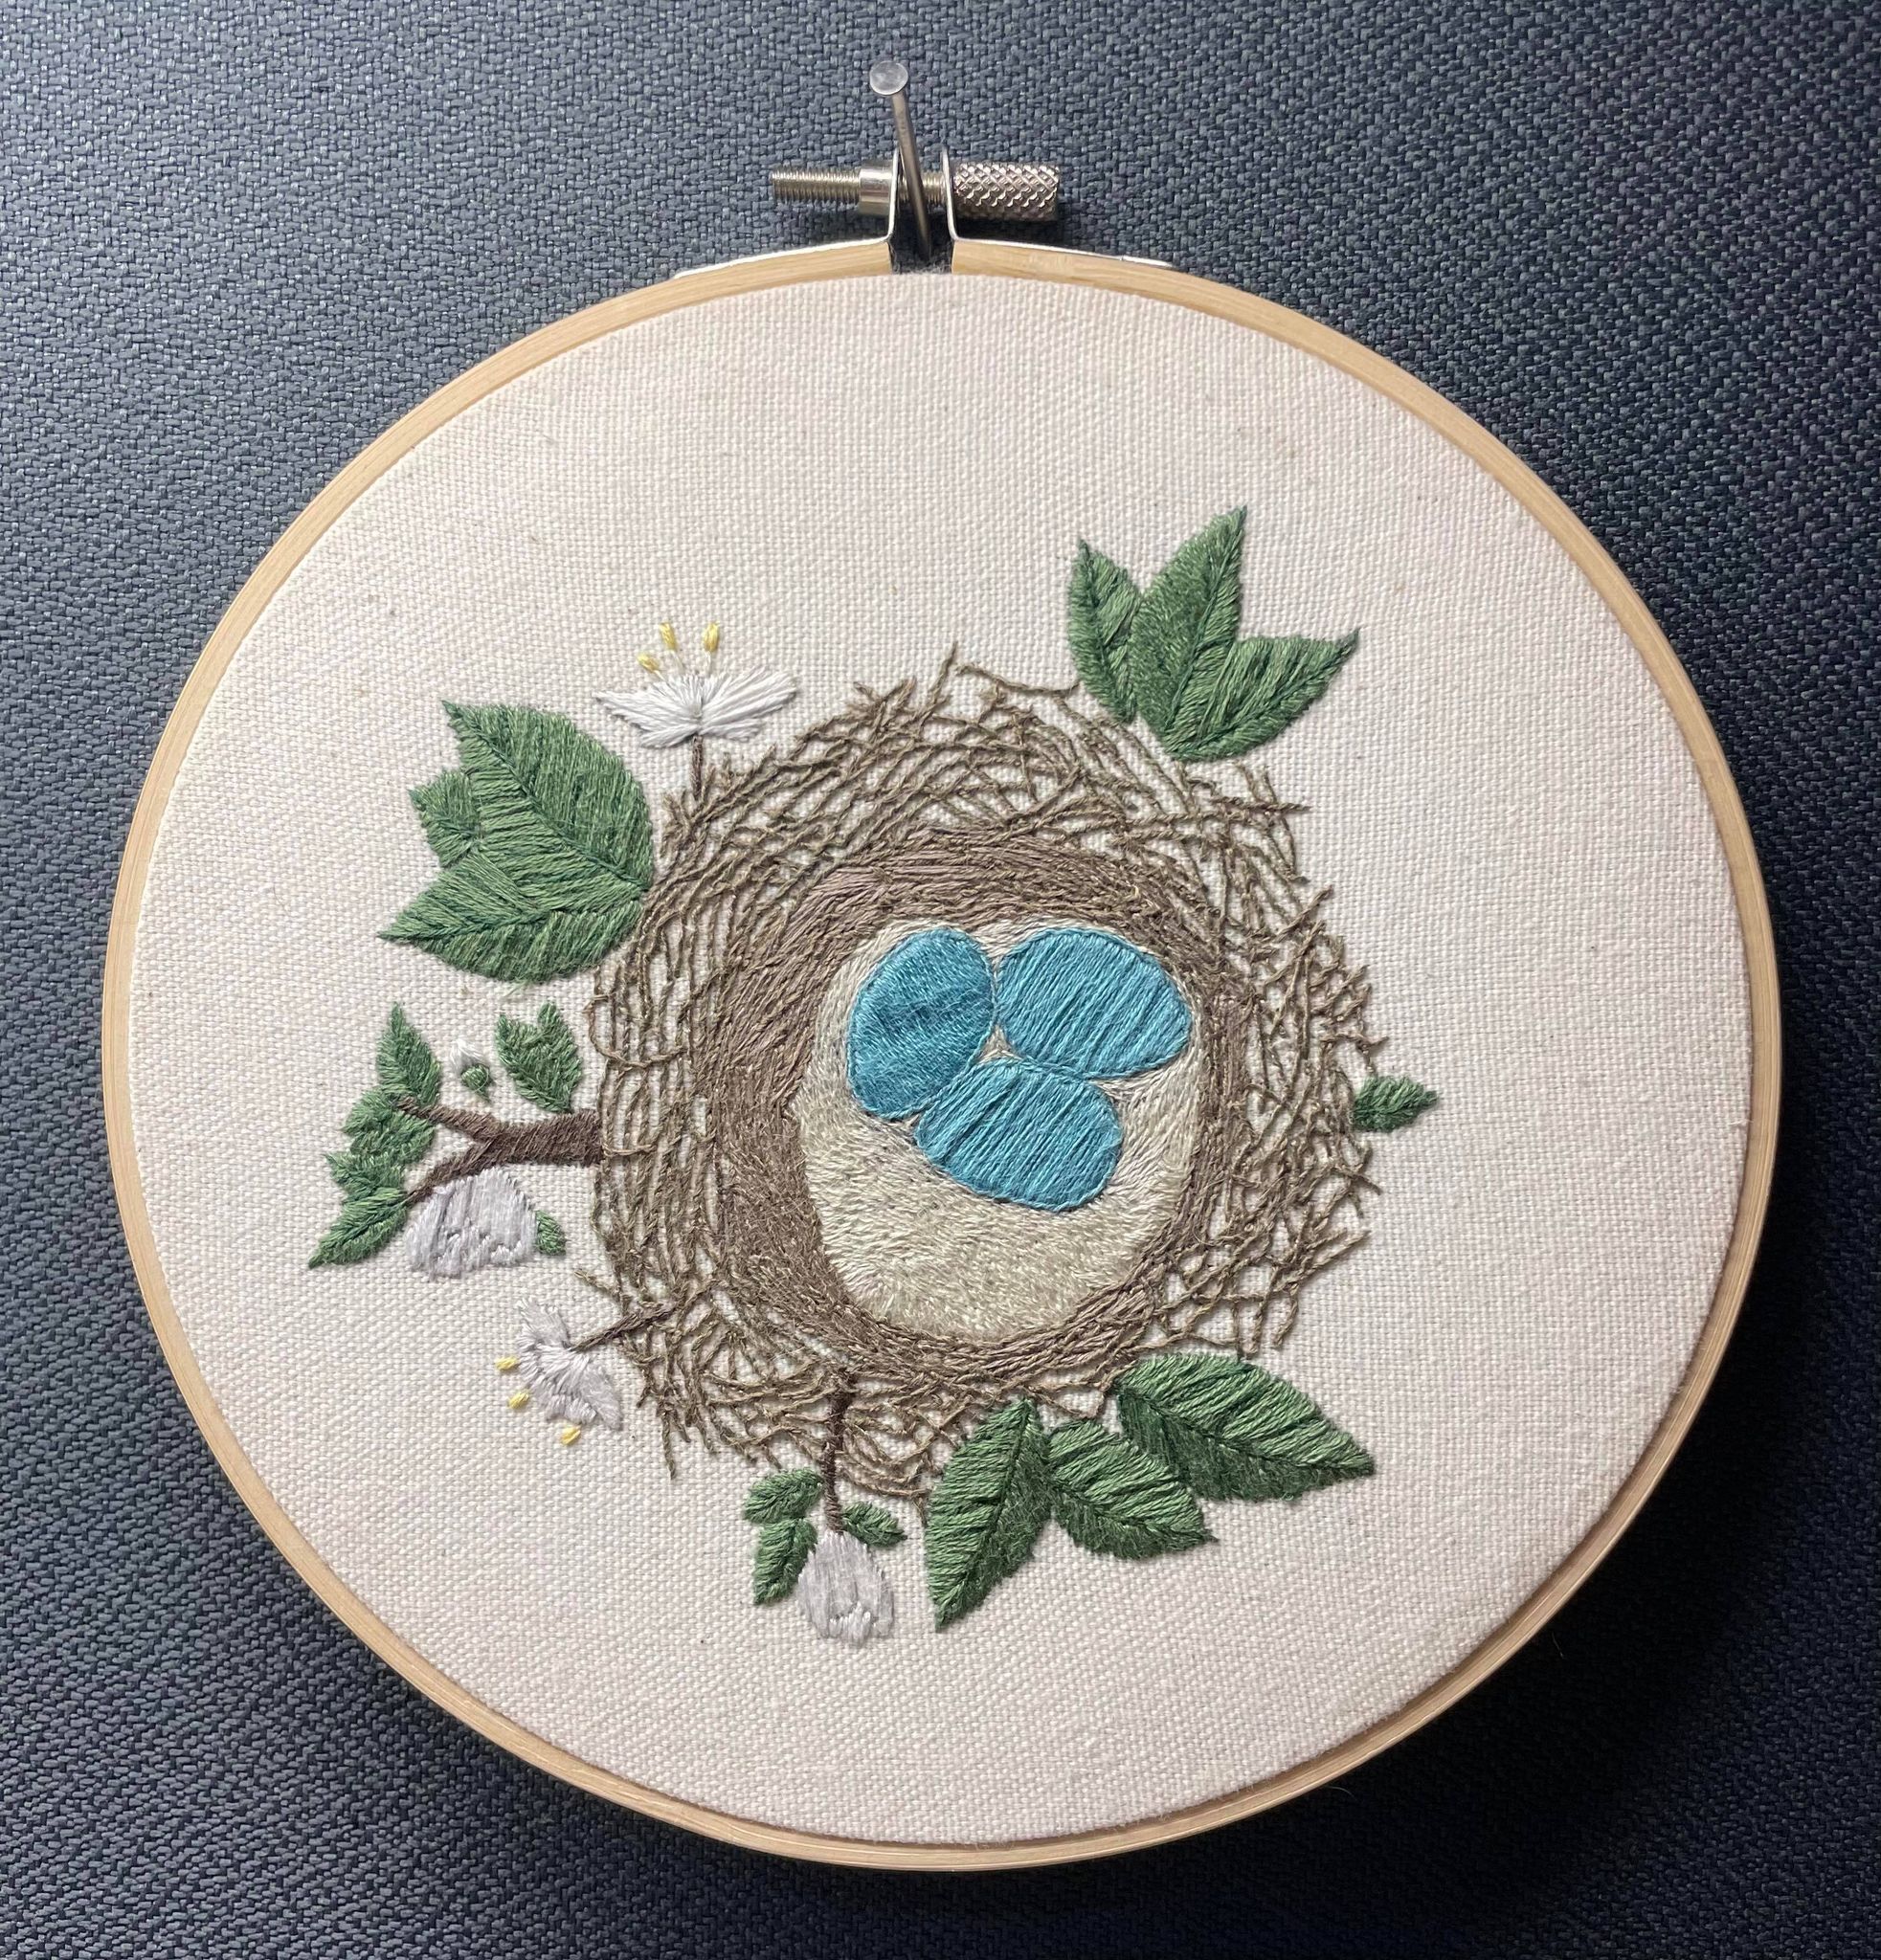 Cozy Nest Finished Embroidery Piece